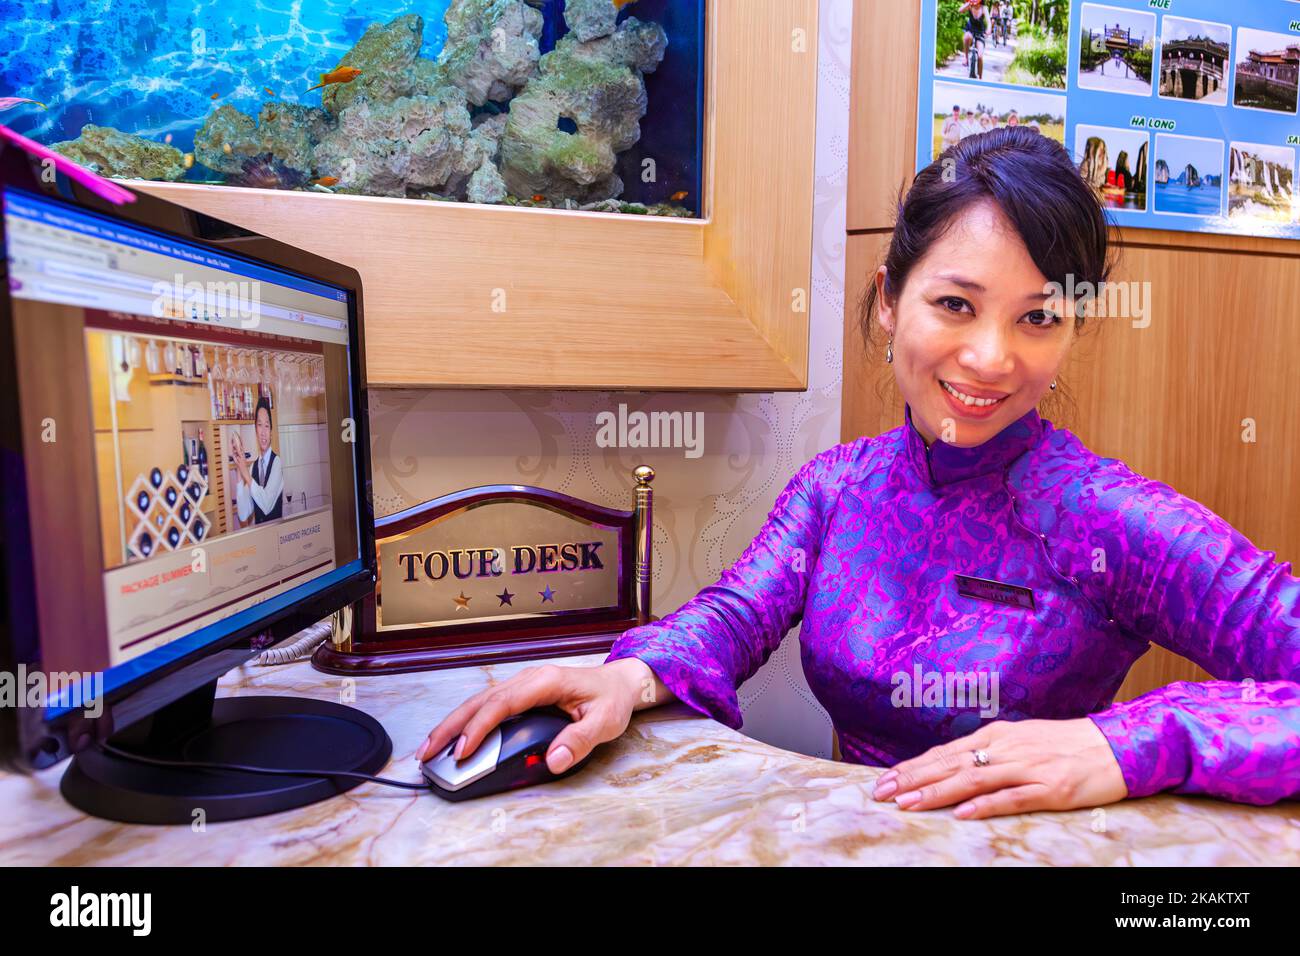 Vietnamese hotel receptionist wearing ao dai making booking on internet at tour desk, Ho Chi Minh City, Vietnam Stock Photo